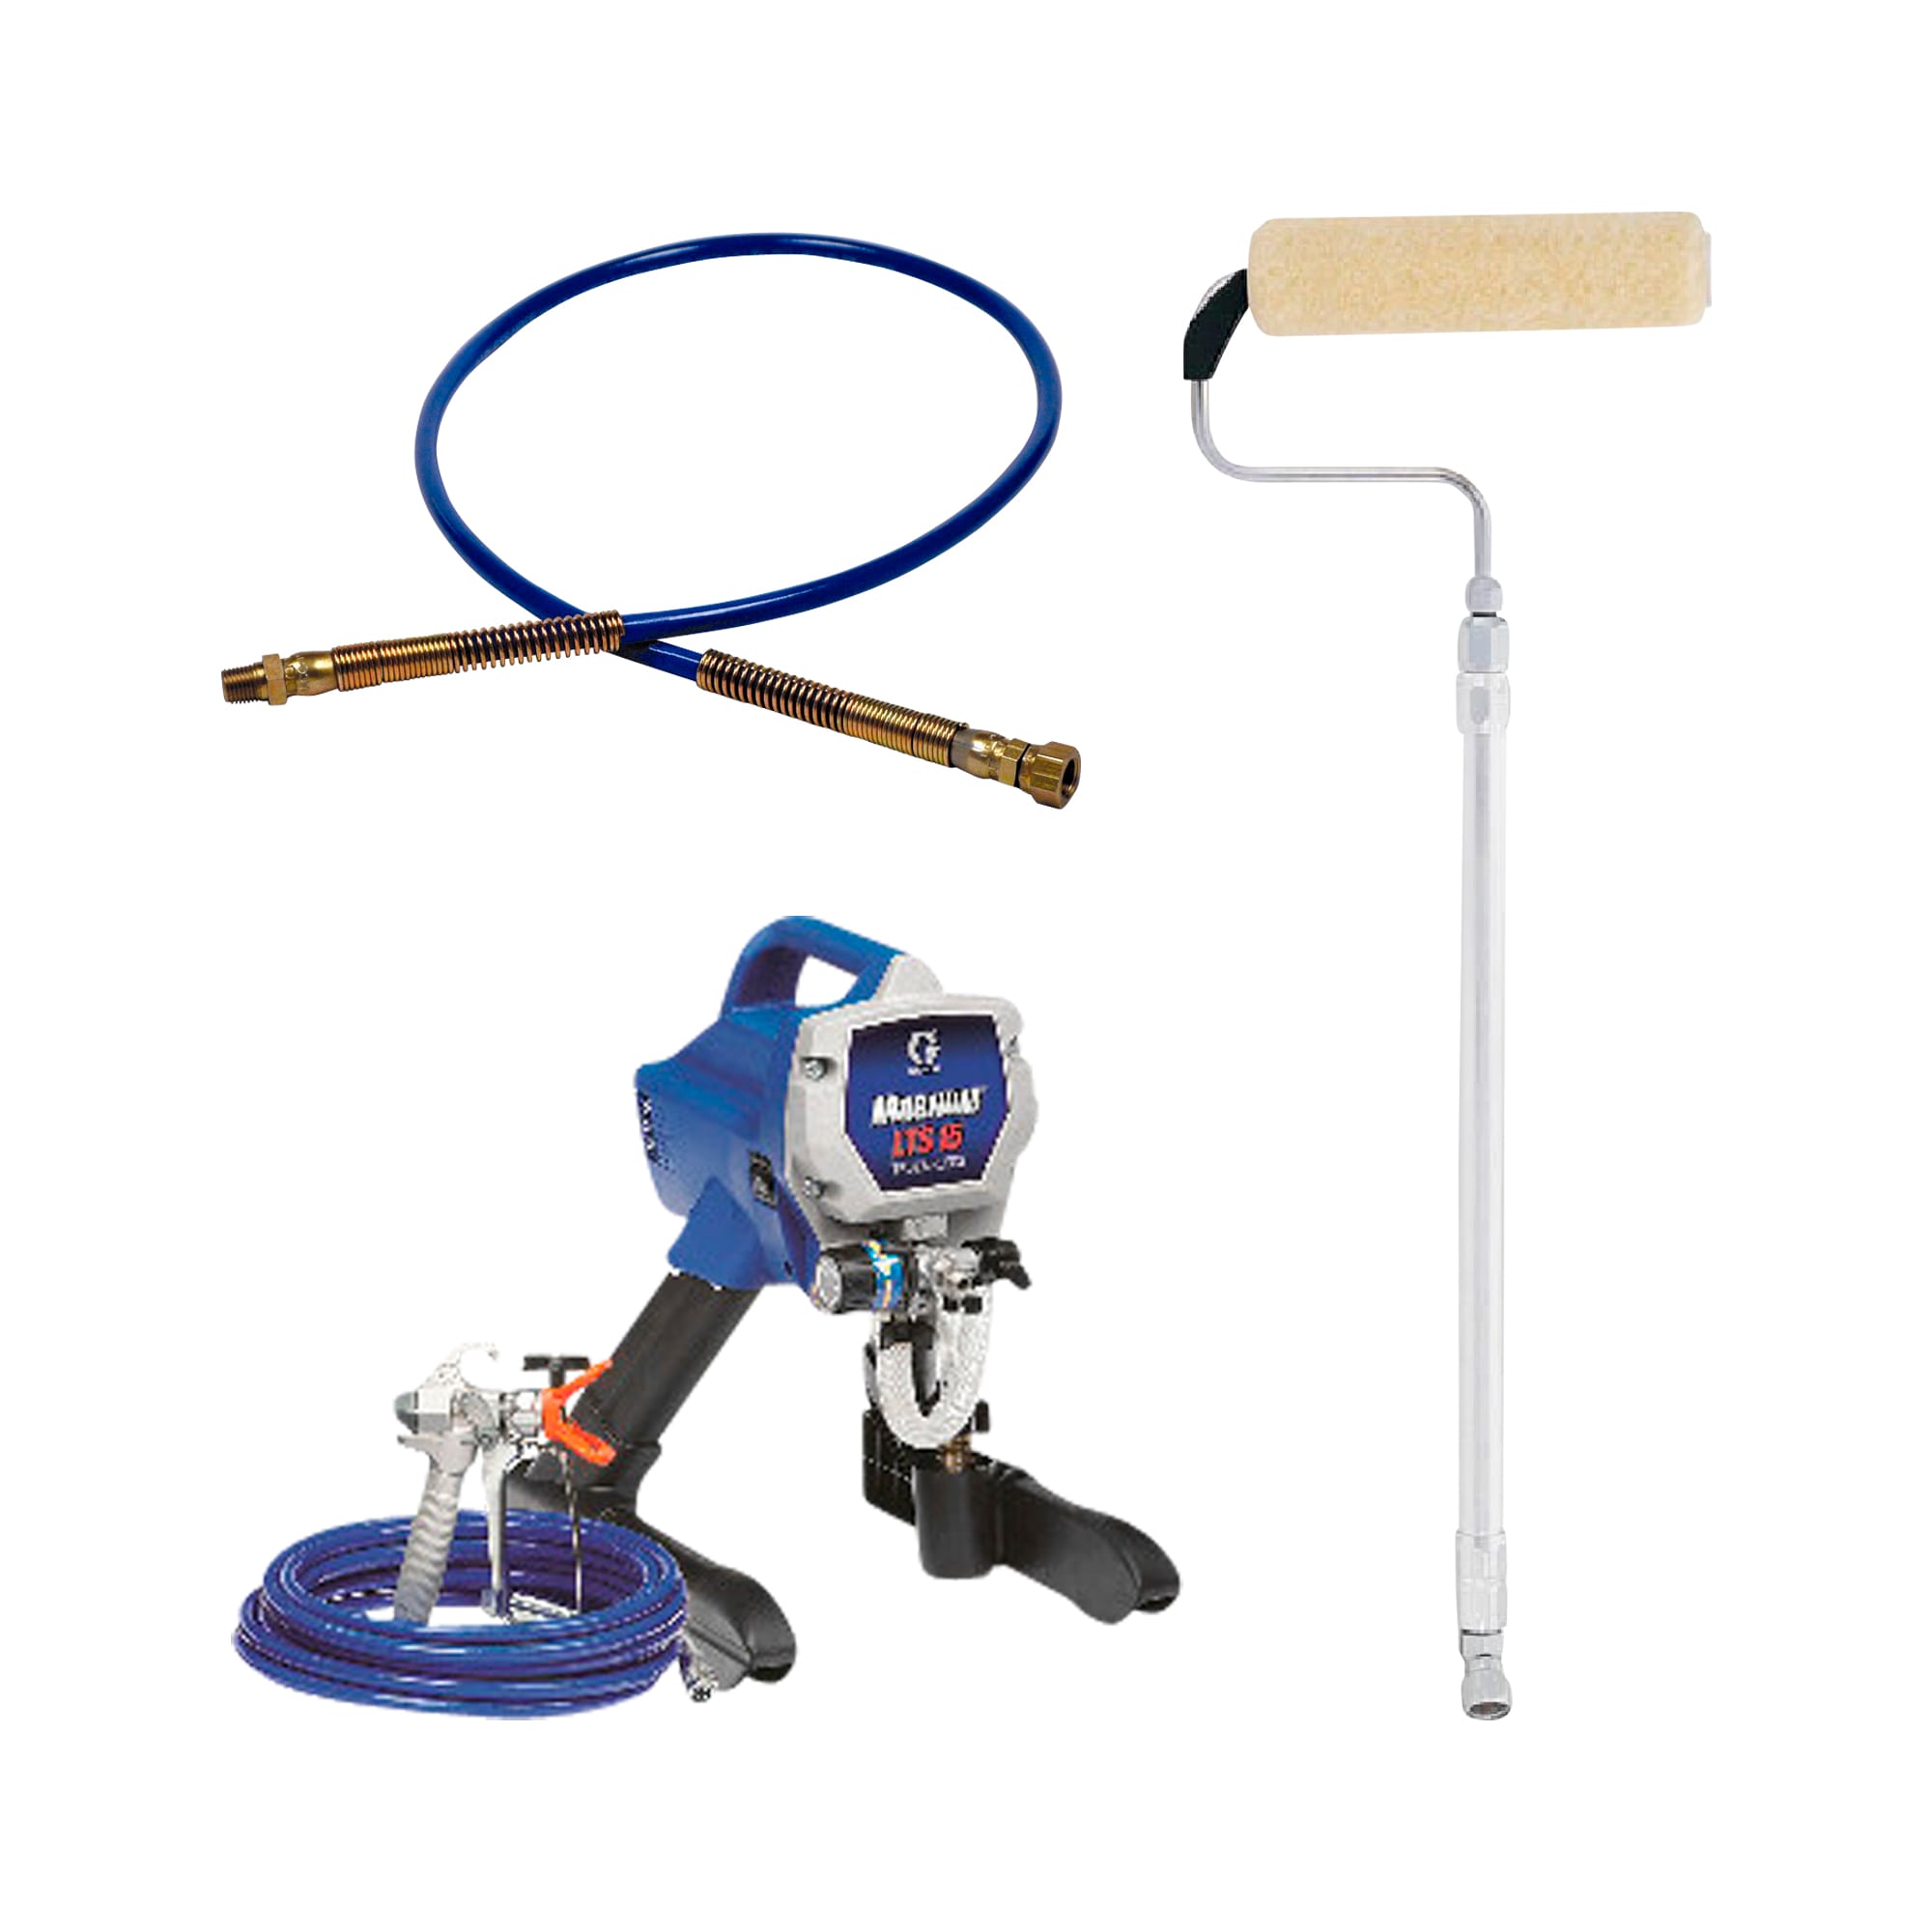 liberal beslag salat Shop Graco Graco Airless Paint Sprayer and Accessories at Lowes.com